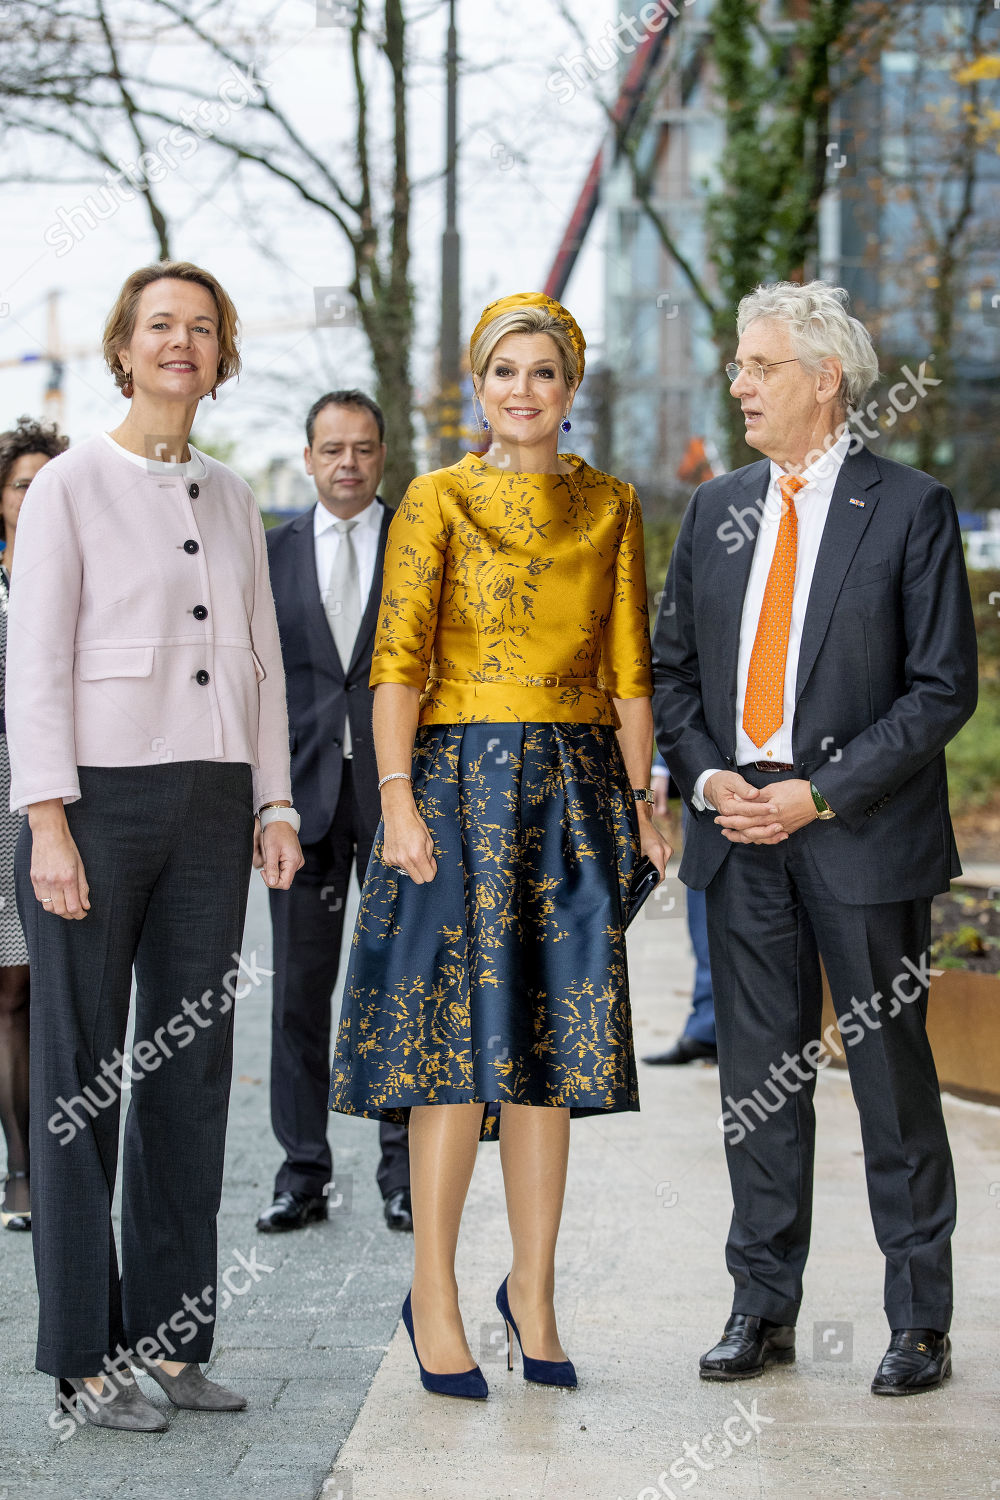 maxima-opens-the-new-office-building-of-the-charity-lotteries-amsterdam-netherlands-shutterstock-editorial-10015294c.jpg